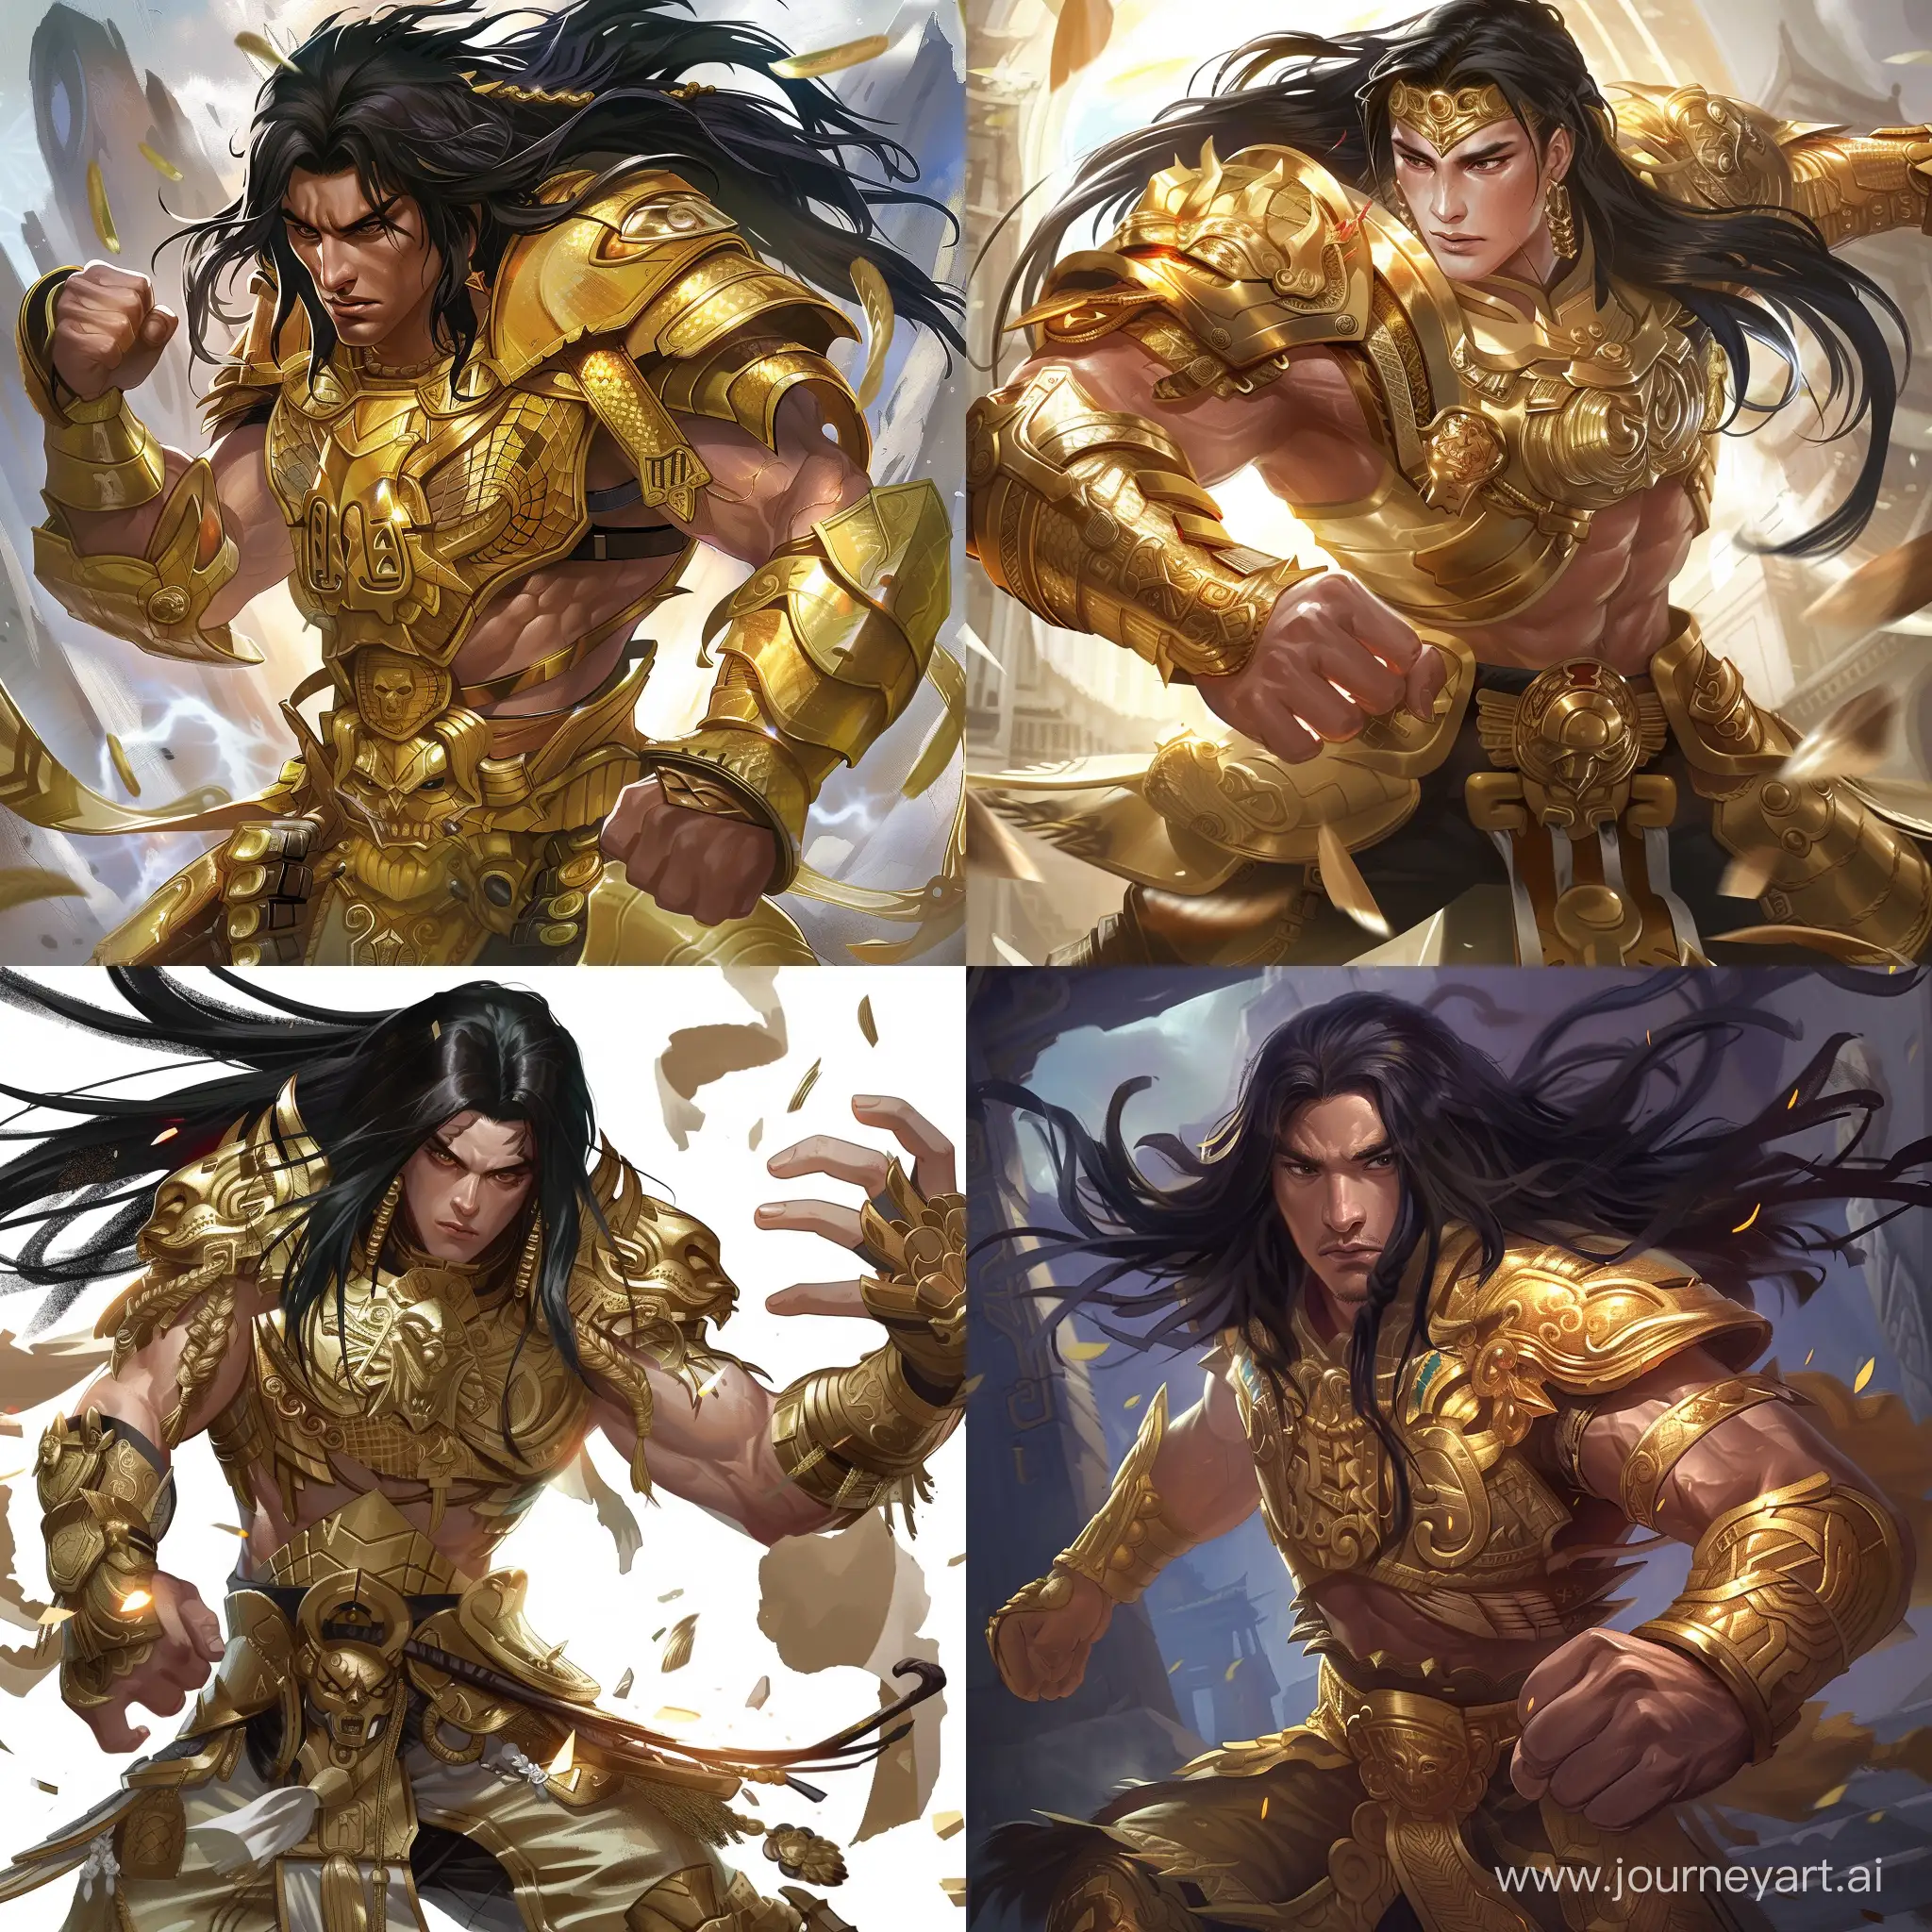 Aztec fighter in golden armor. In the artstyle of a chinese MMORPG. In the style of Tekken. He has long black hair and is ready to fight.